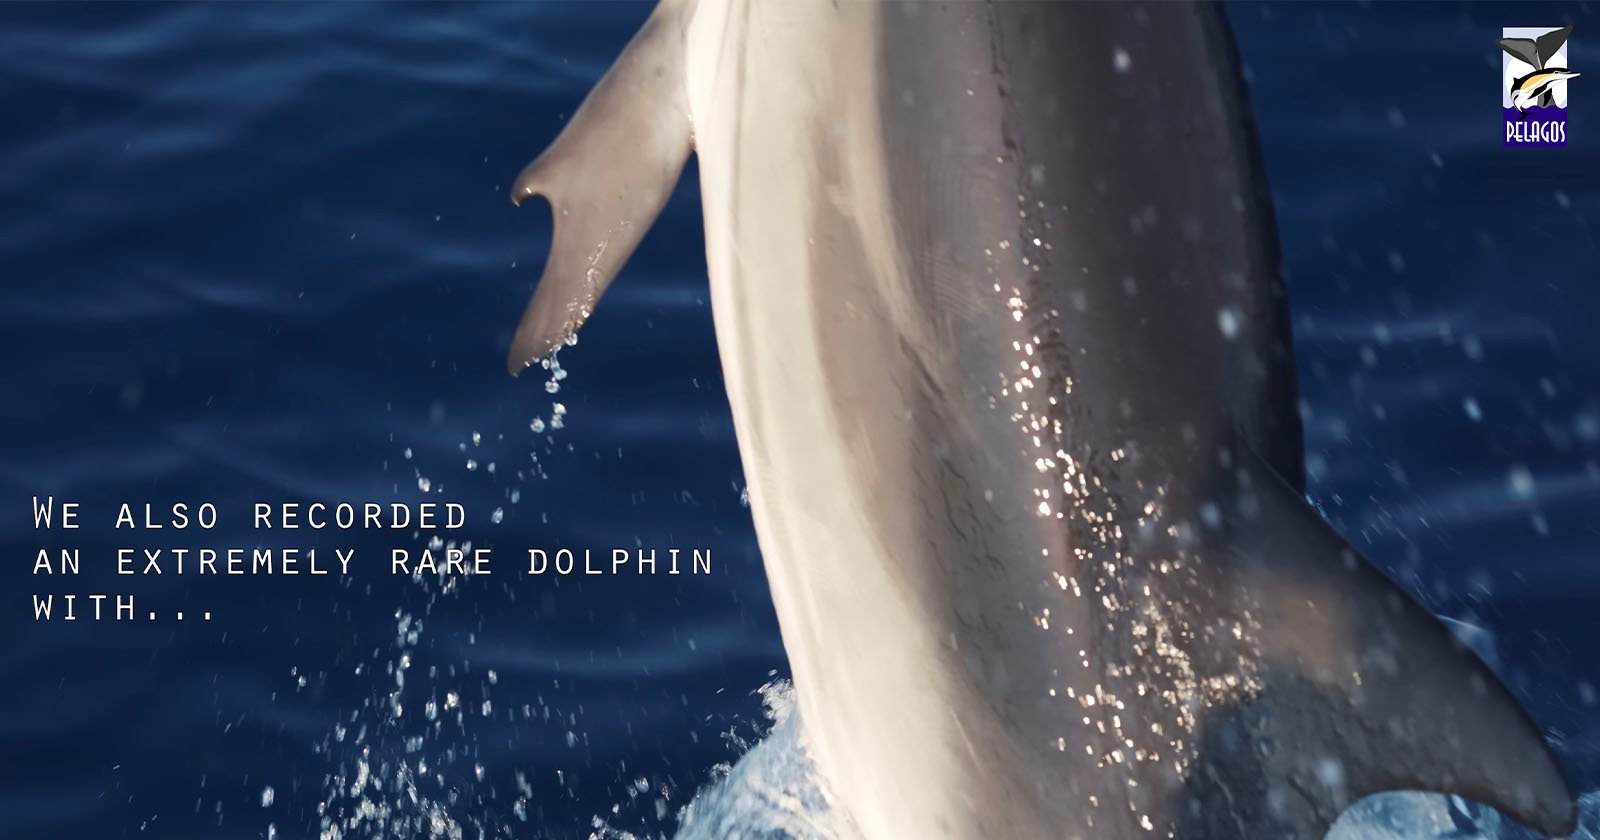  footage captures extremely rare dolphin thumbs 